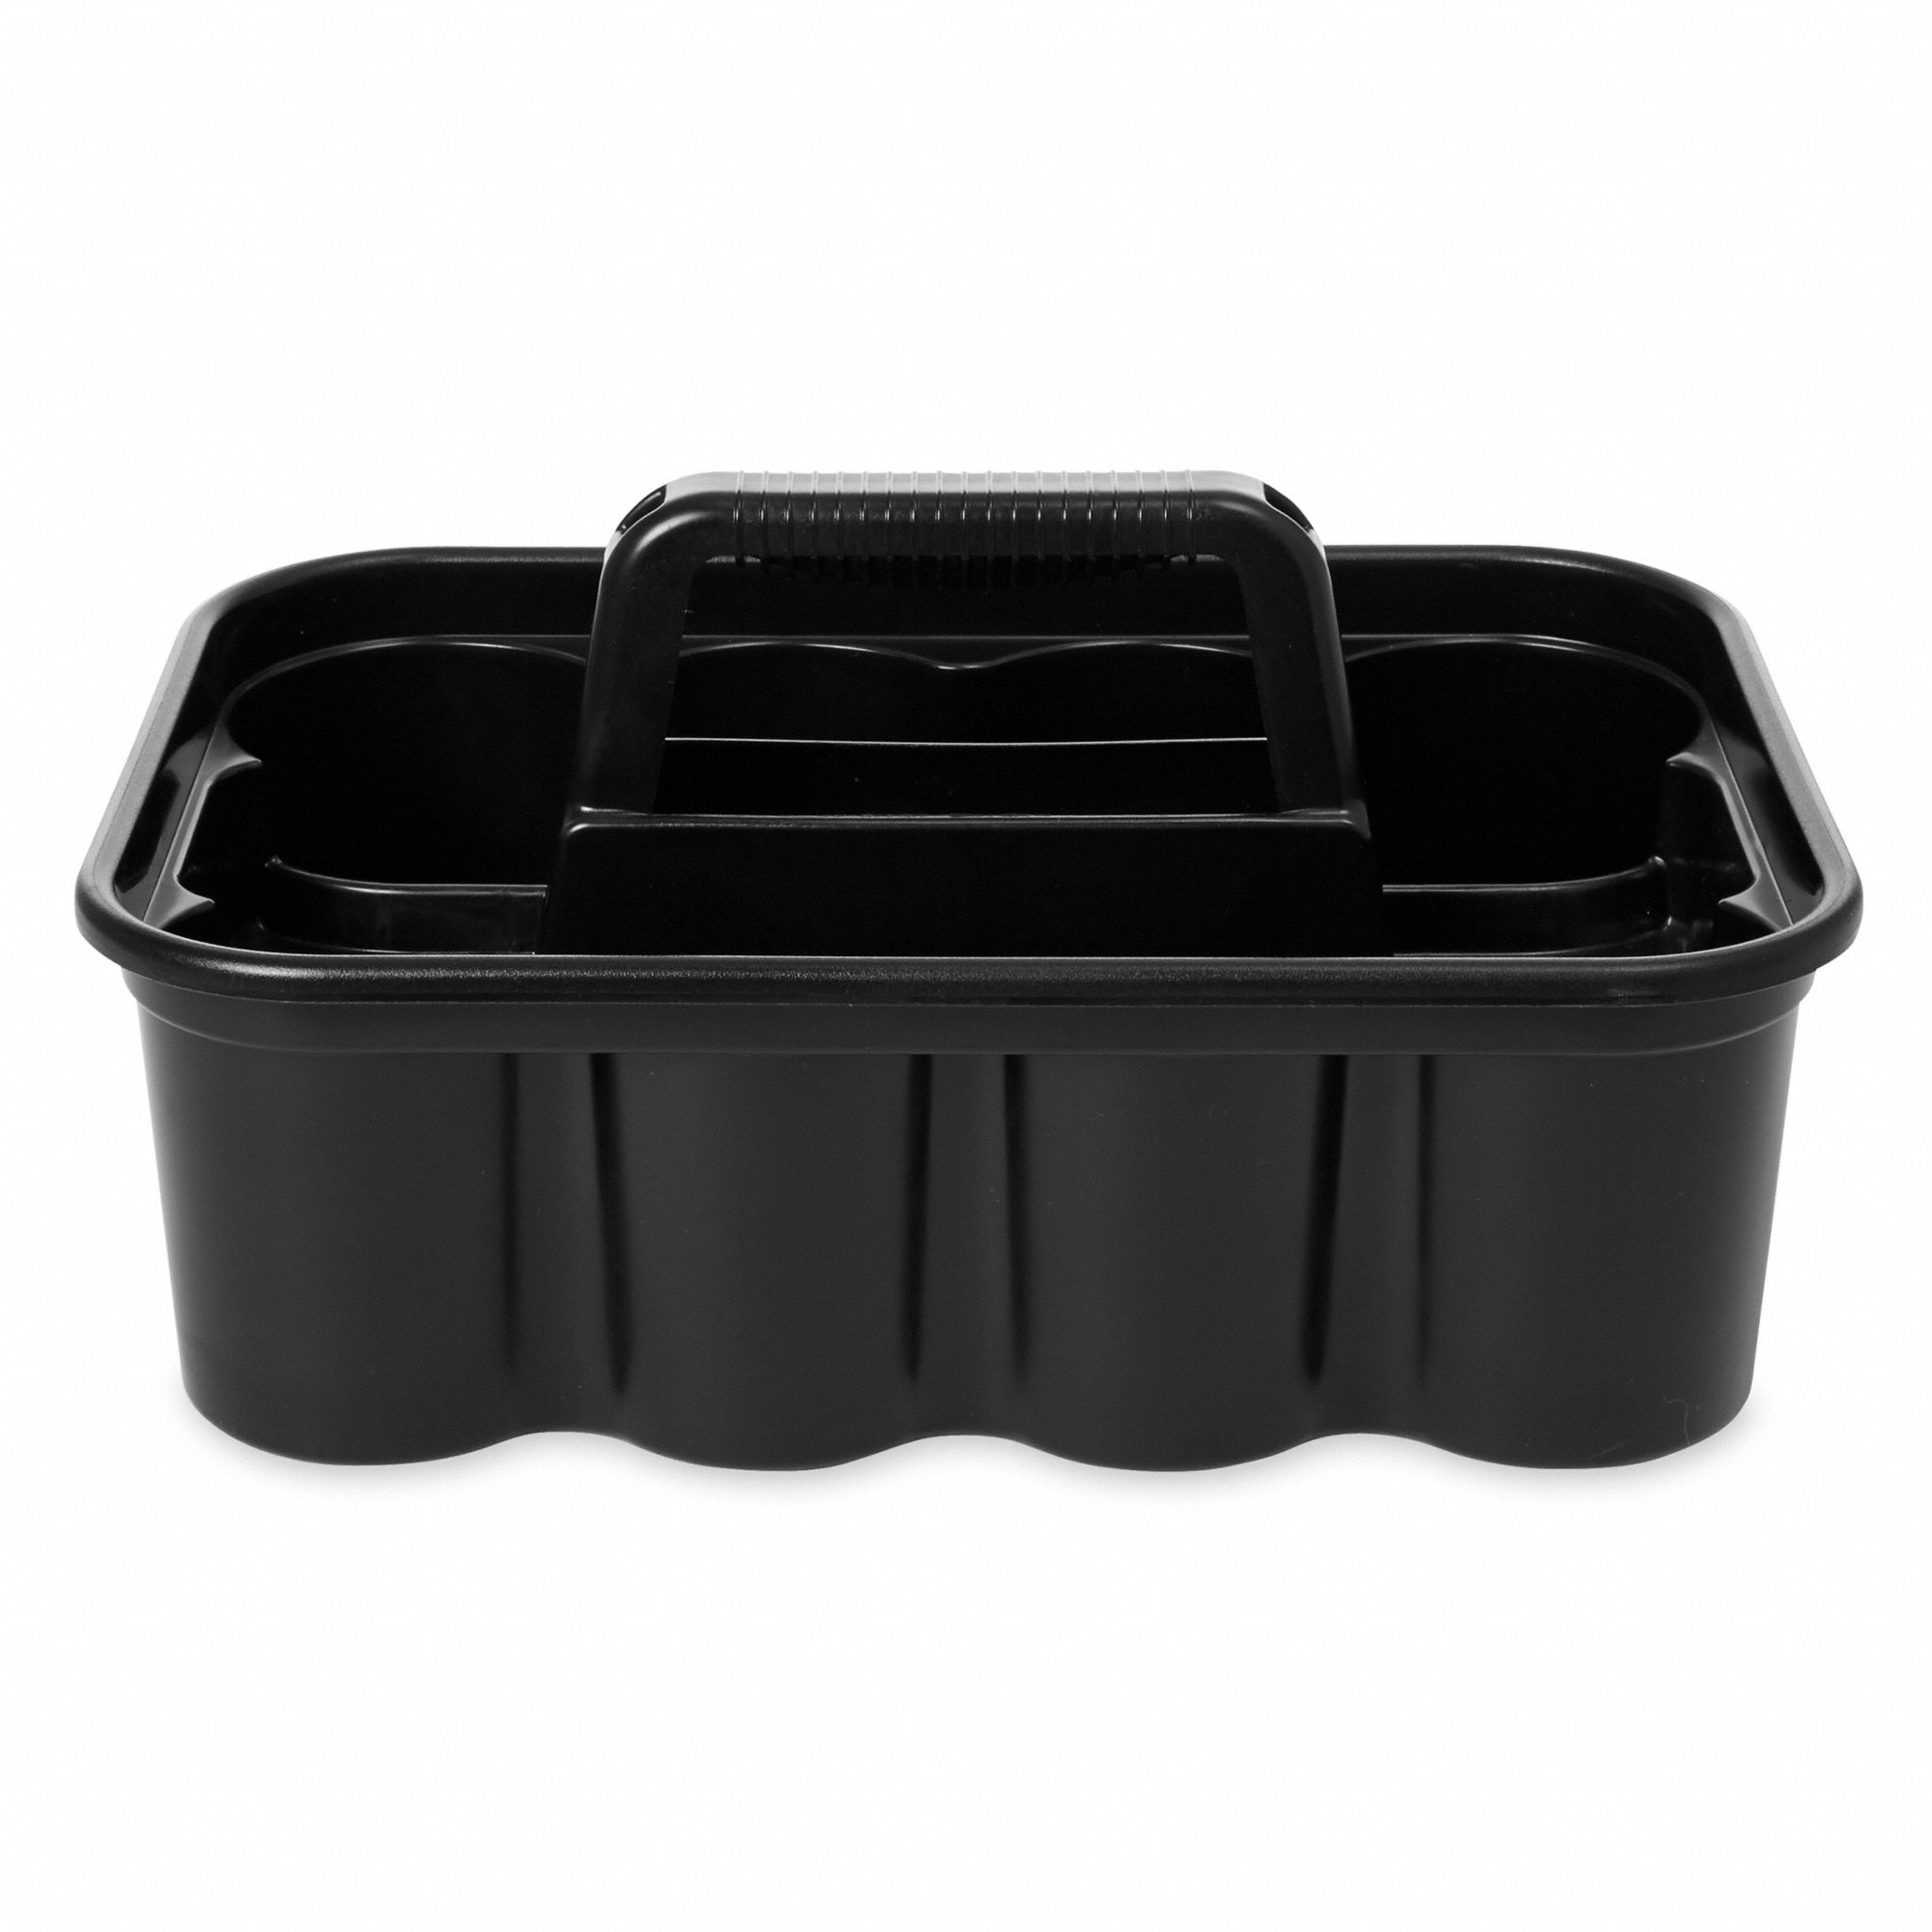 Newell Rubbermaid 315488BLA Janitor All-Purpose Carry Caddy 